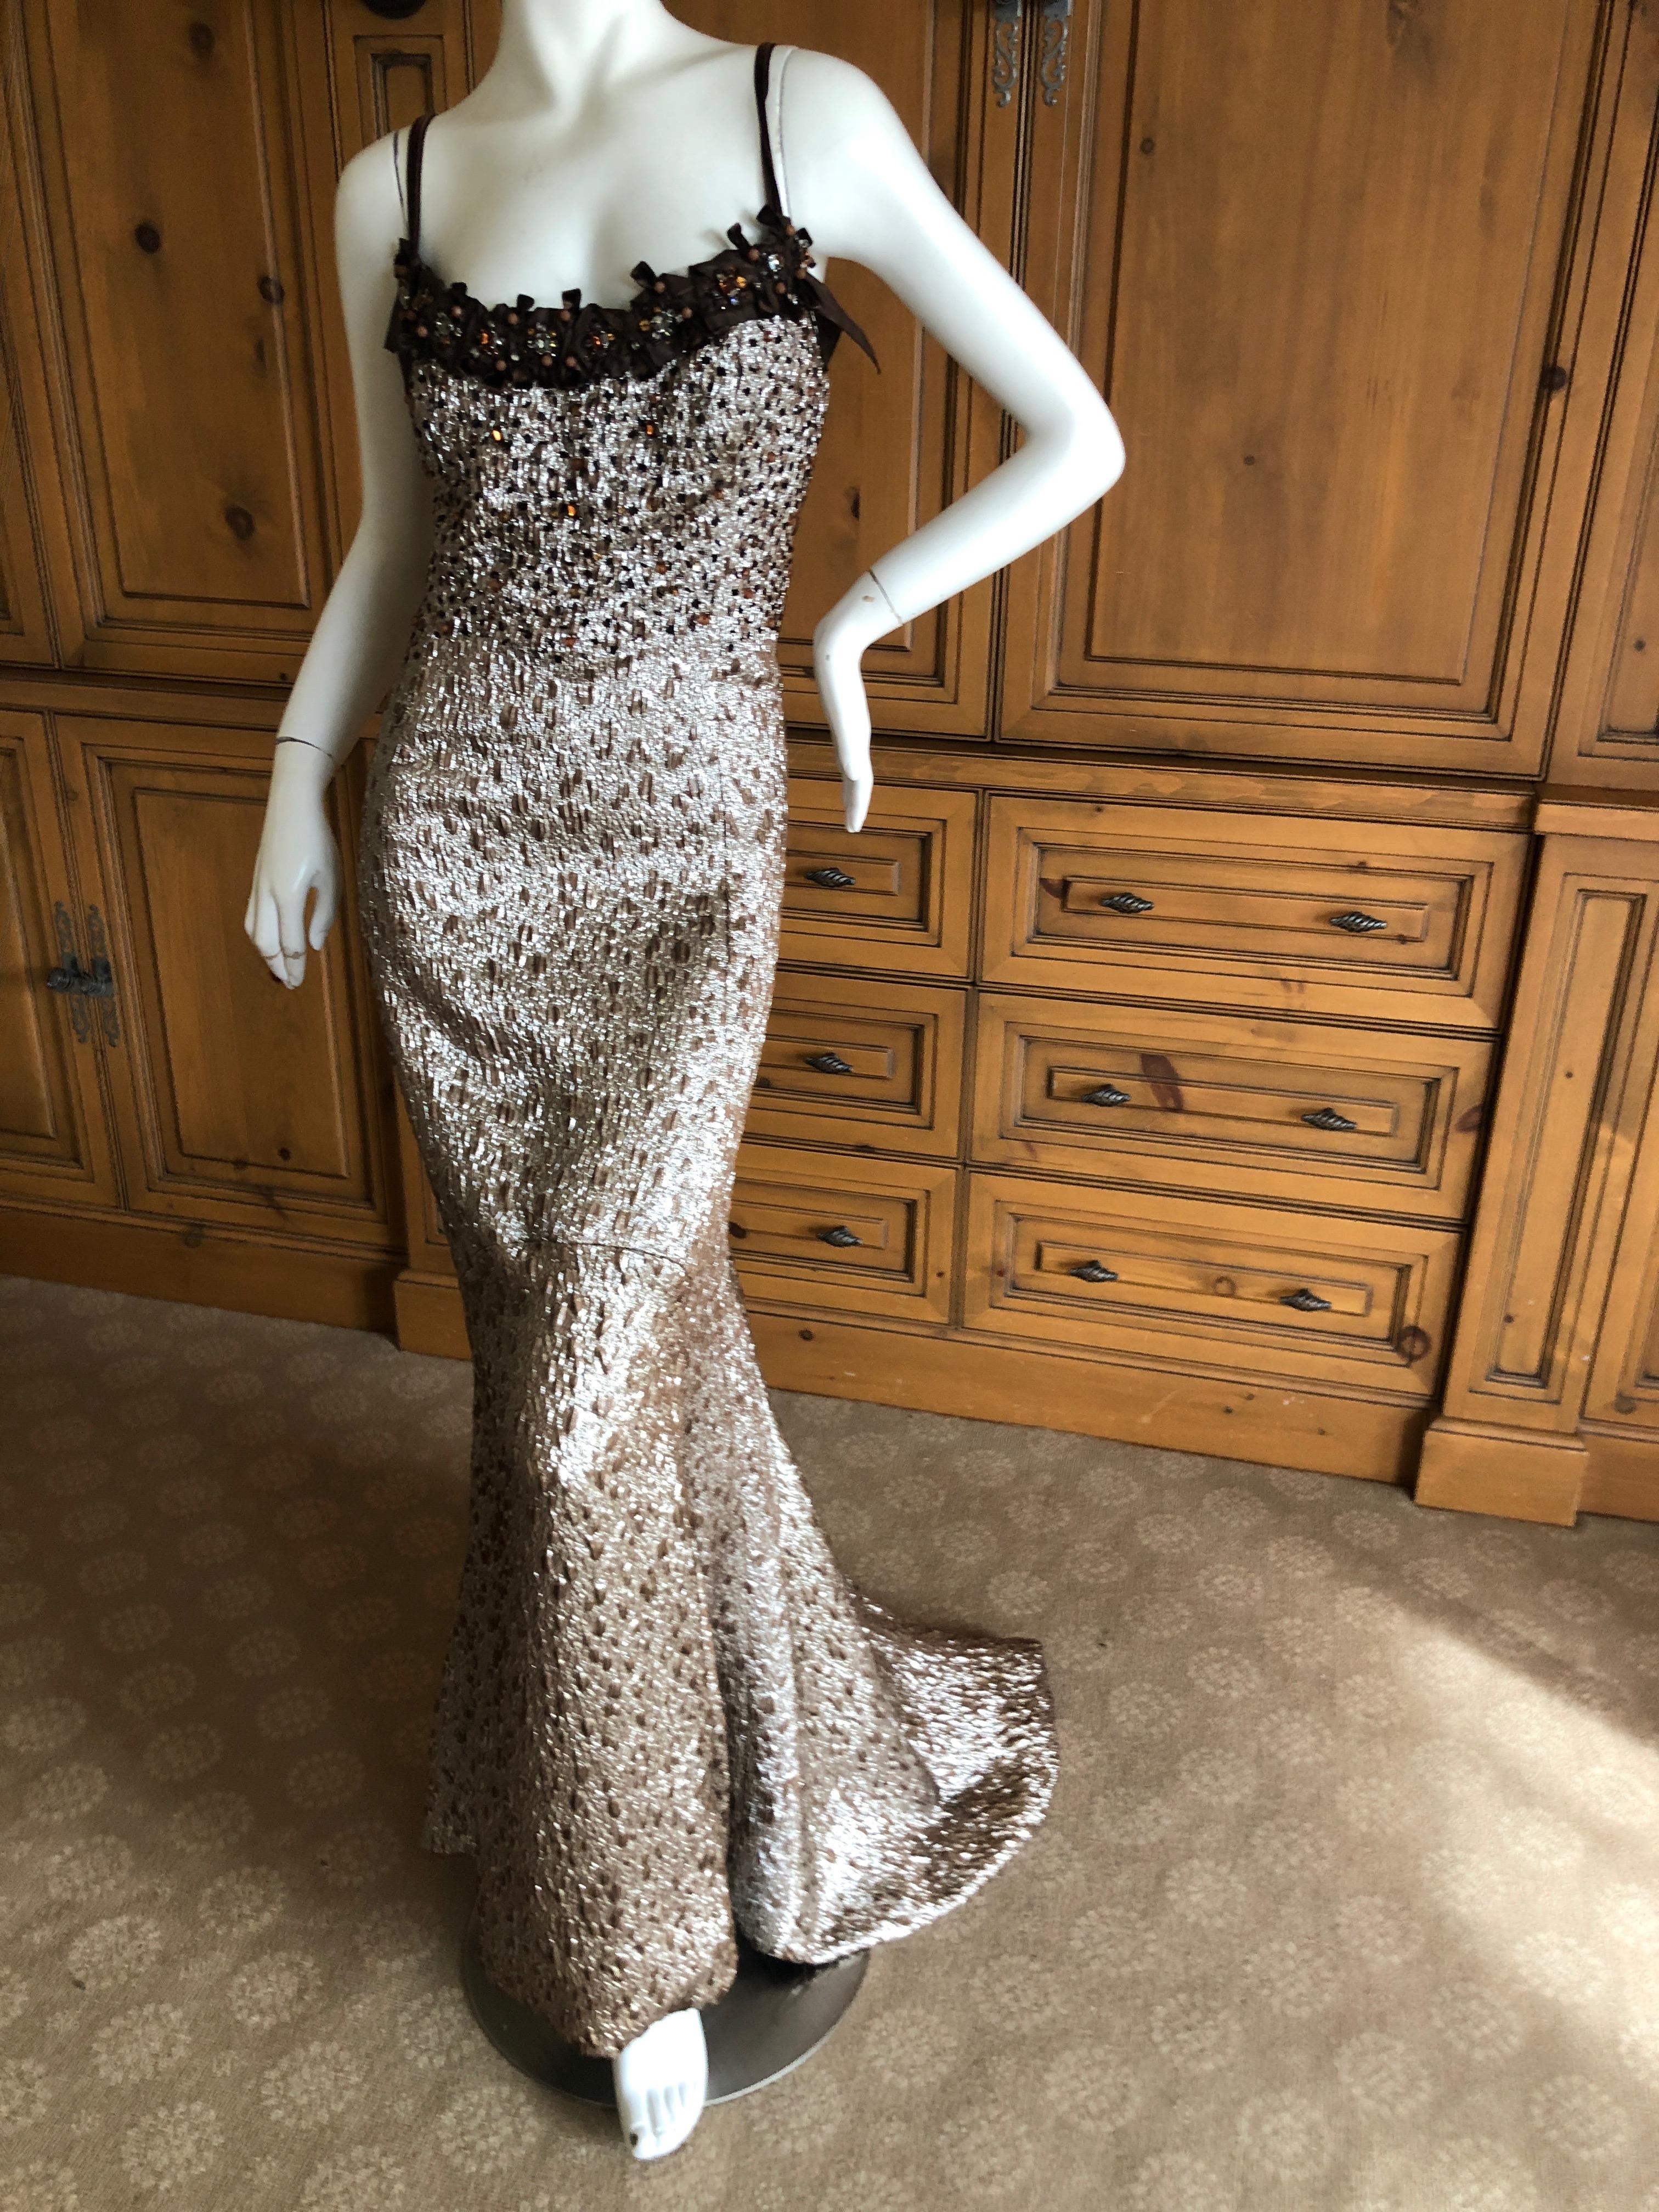 Carolina Herrera Gold Embellished Evening Gown in Hard to Find Size 14 For Sale 5